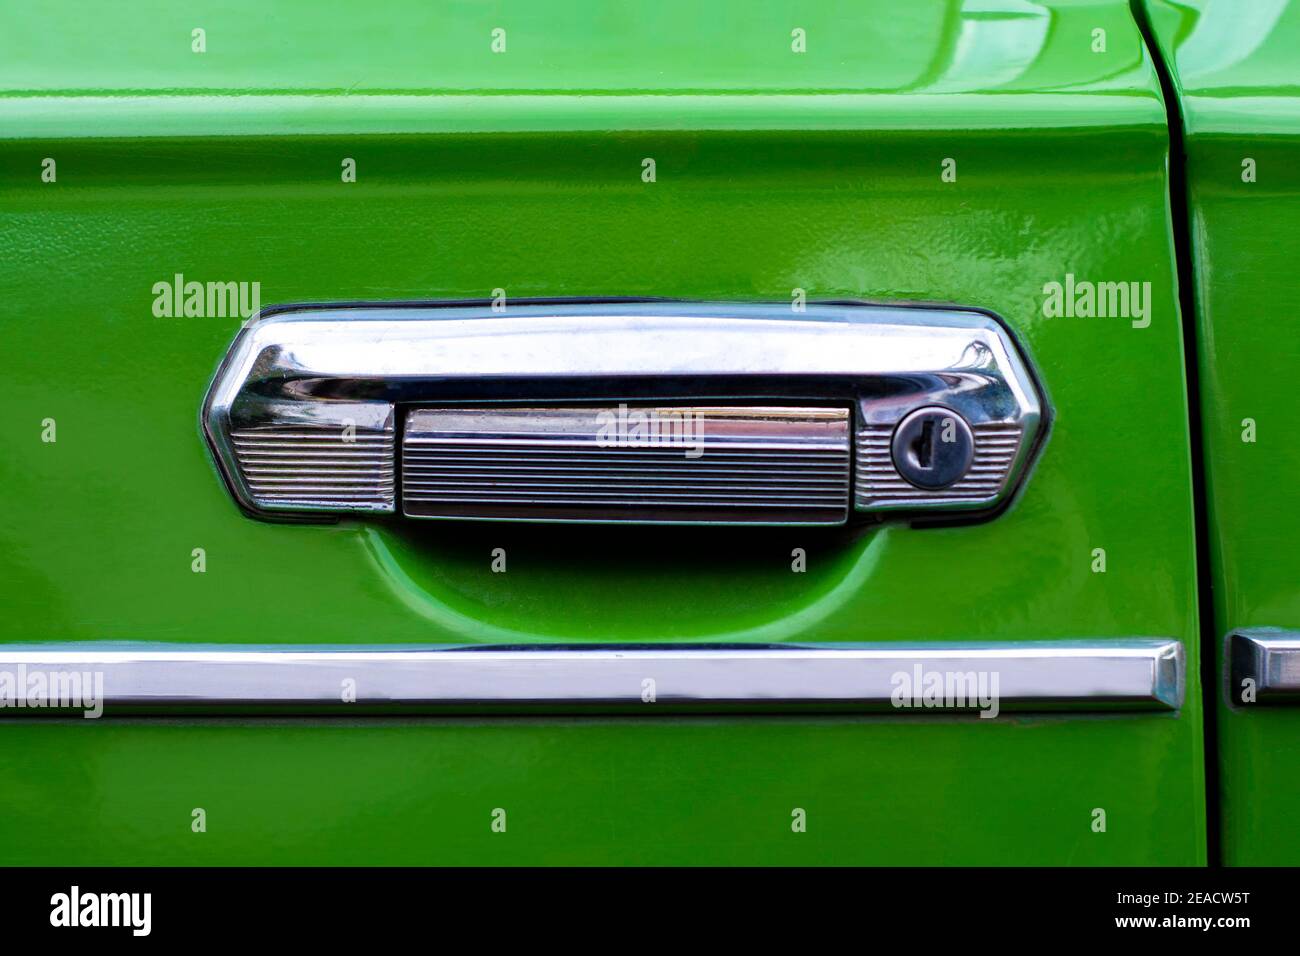 Iron handle door of old Soviet car. View from the front. The body is green. Kurskoe, Crimea - 4 October, 2020 Stock Photo